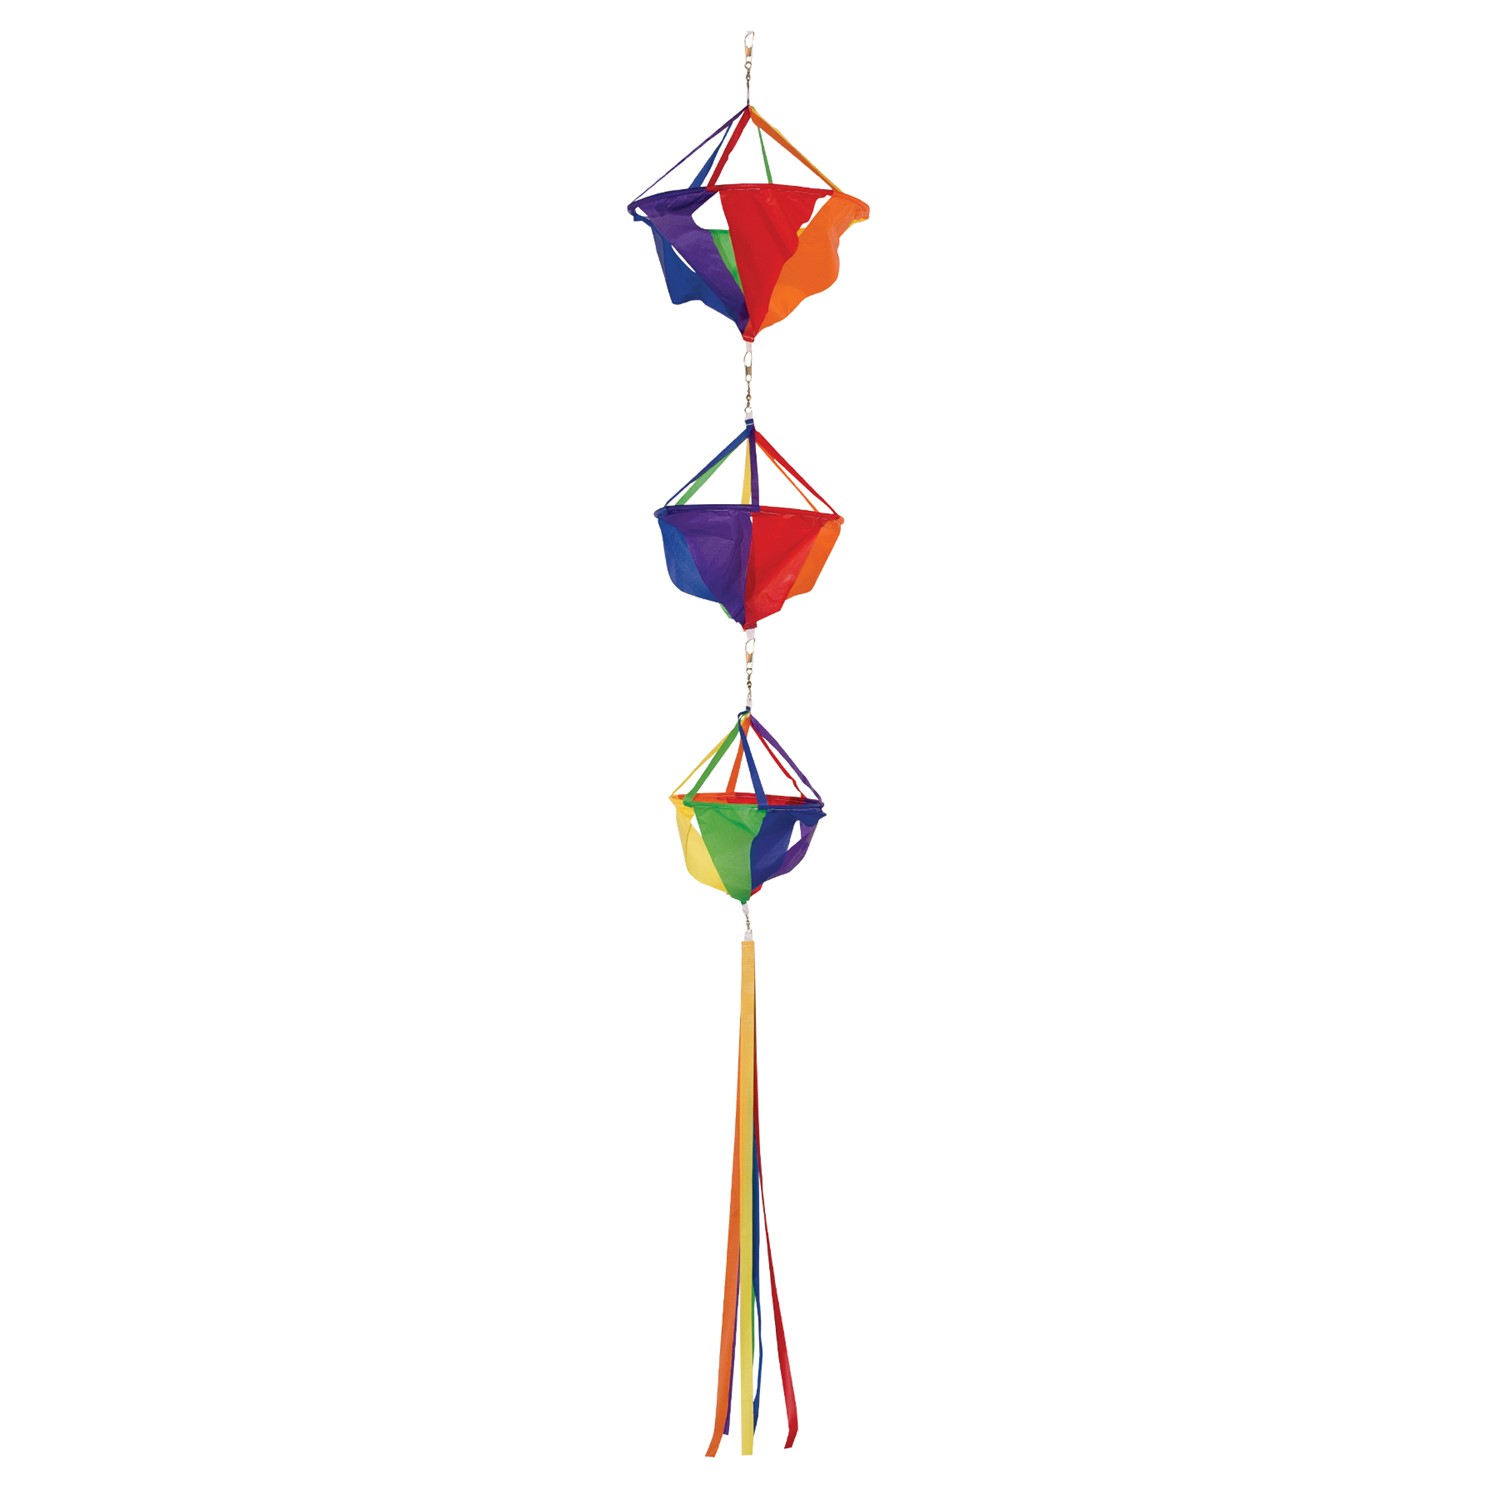 In the Breeze 58" Large Rainbow Spinset 4224